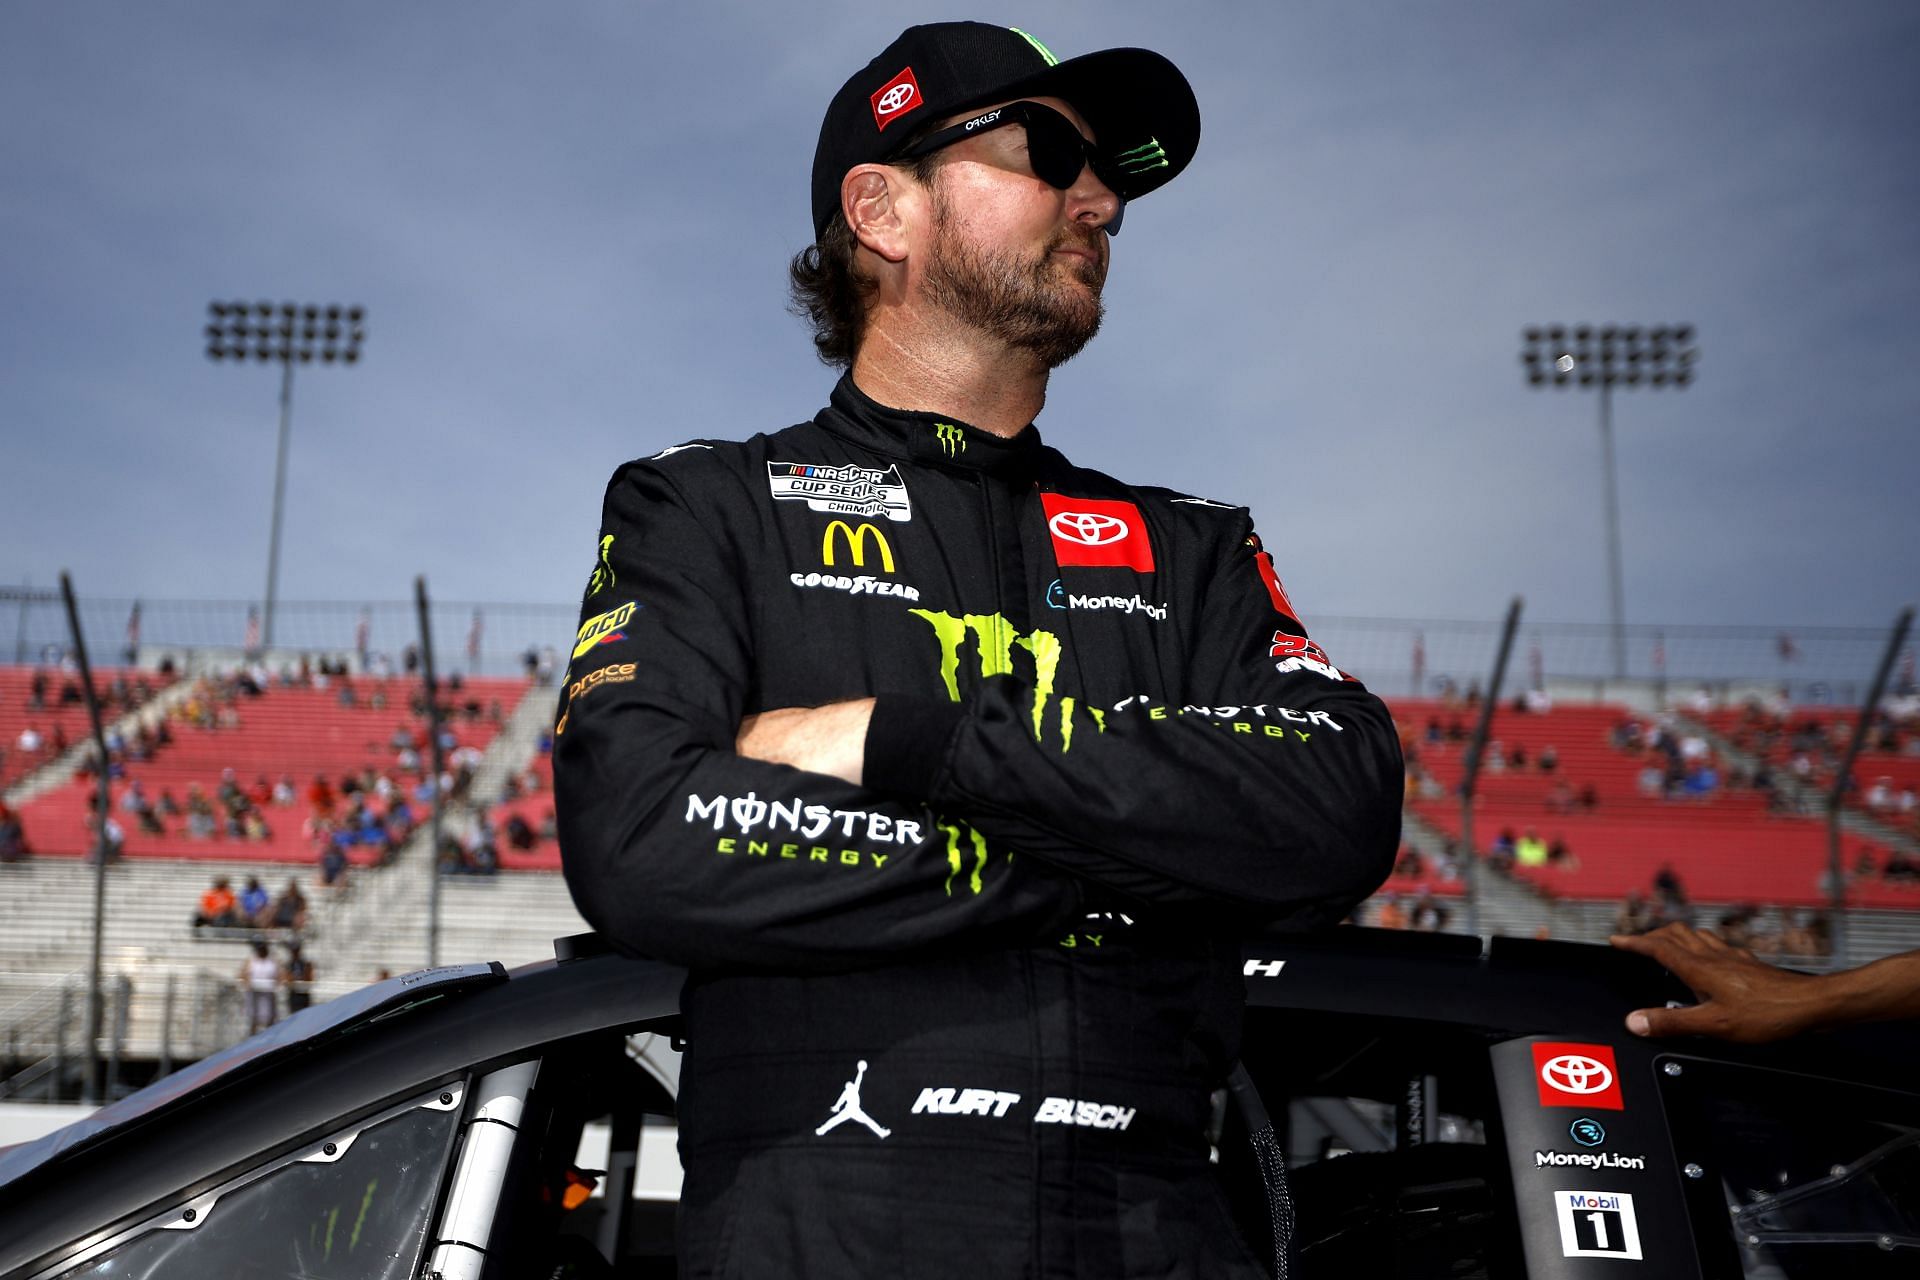 Kurt Busch looks on during qualifying for the NASCAR Cup Series Enjoy Illinois 300 at WWT Raceway